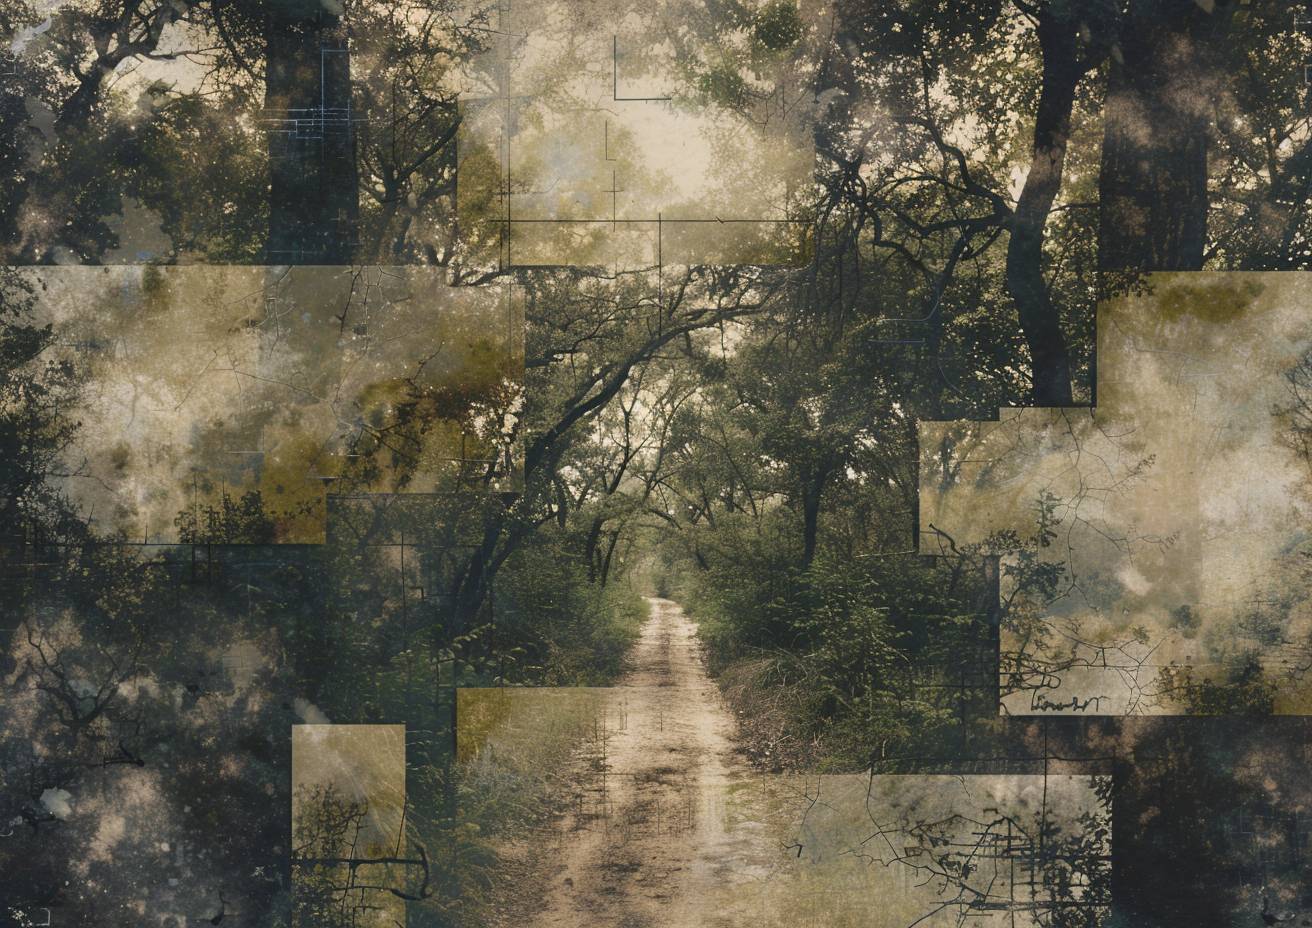 abstract layered silkscreen print, a lonely trail winds through an oak forest, diffuse sunshine, dark and misty from the rain, fragmented and distorted rectangles, large letters stencil overlay, low contrast palette, rough texture, flat image